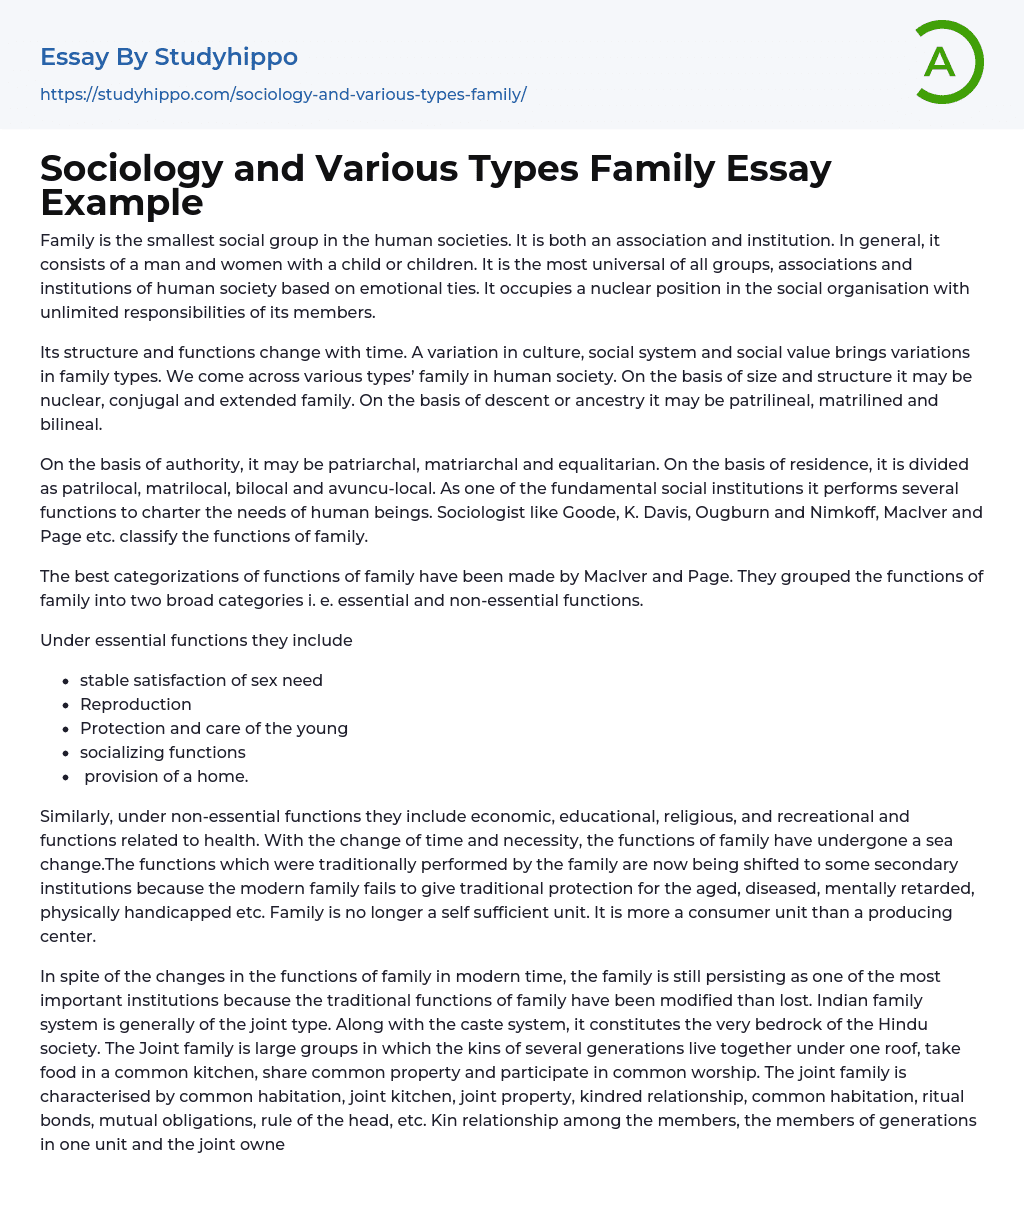 Sociology and Various Types Family Essay Example